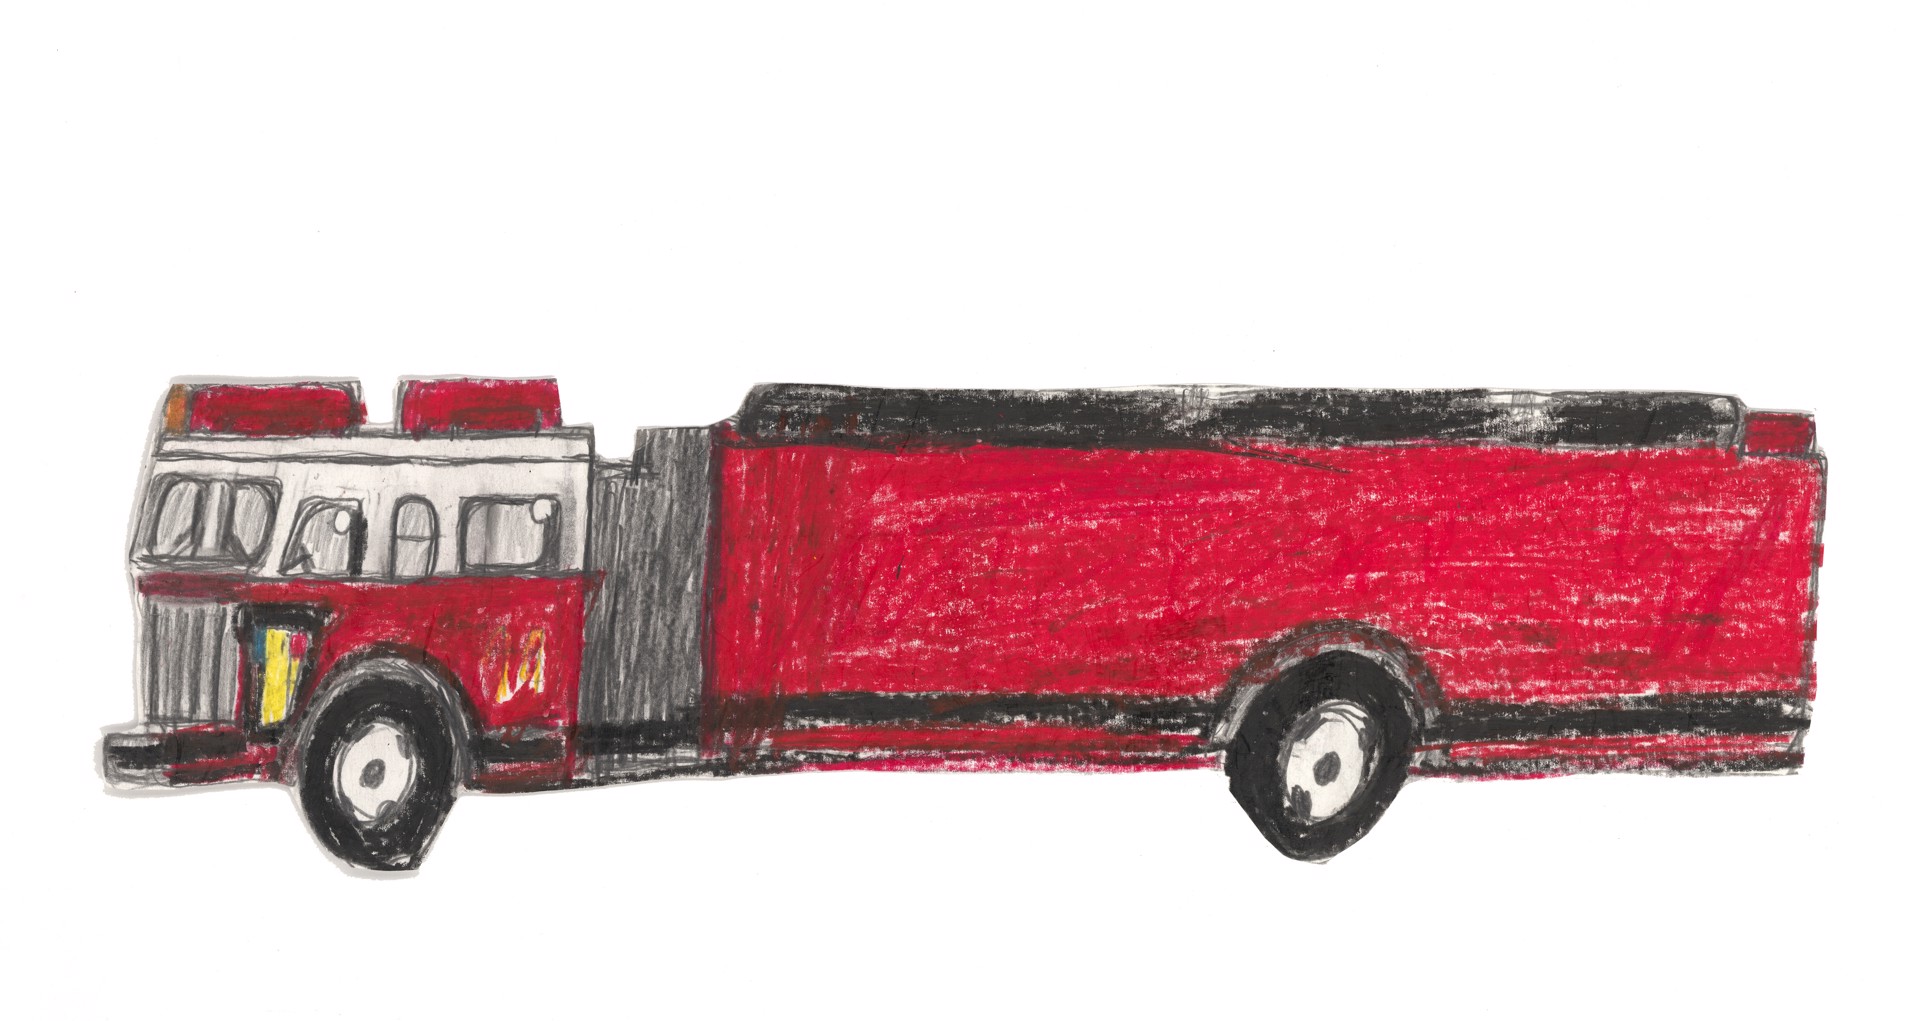 Red Fire Truck by Michael Haynes